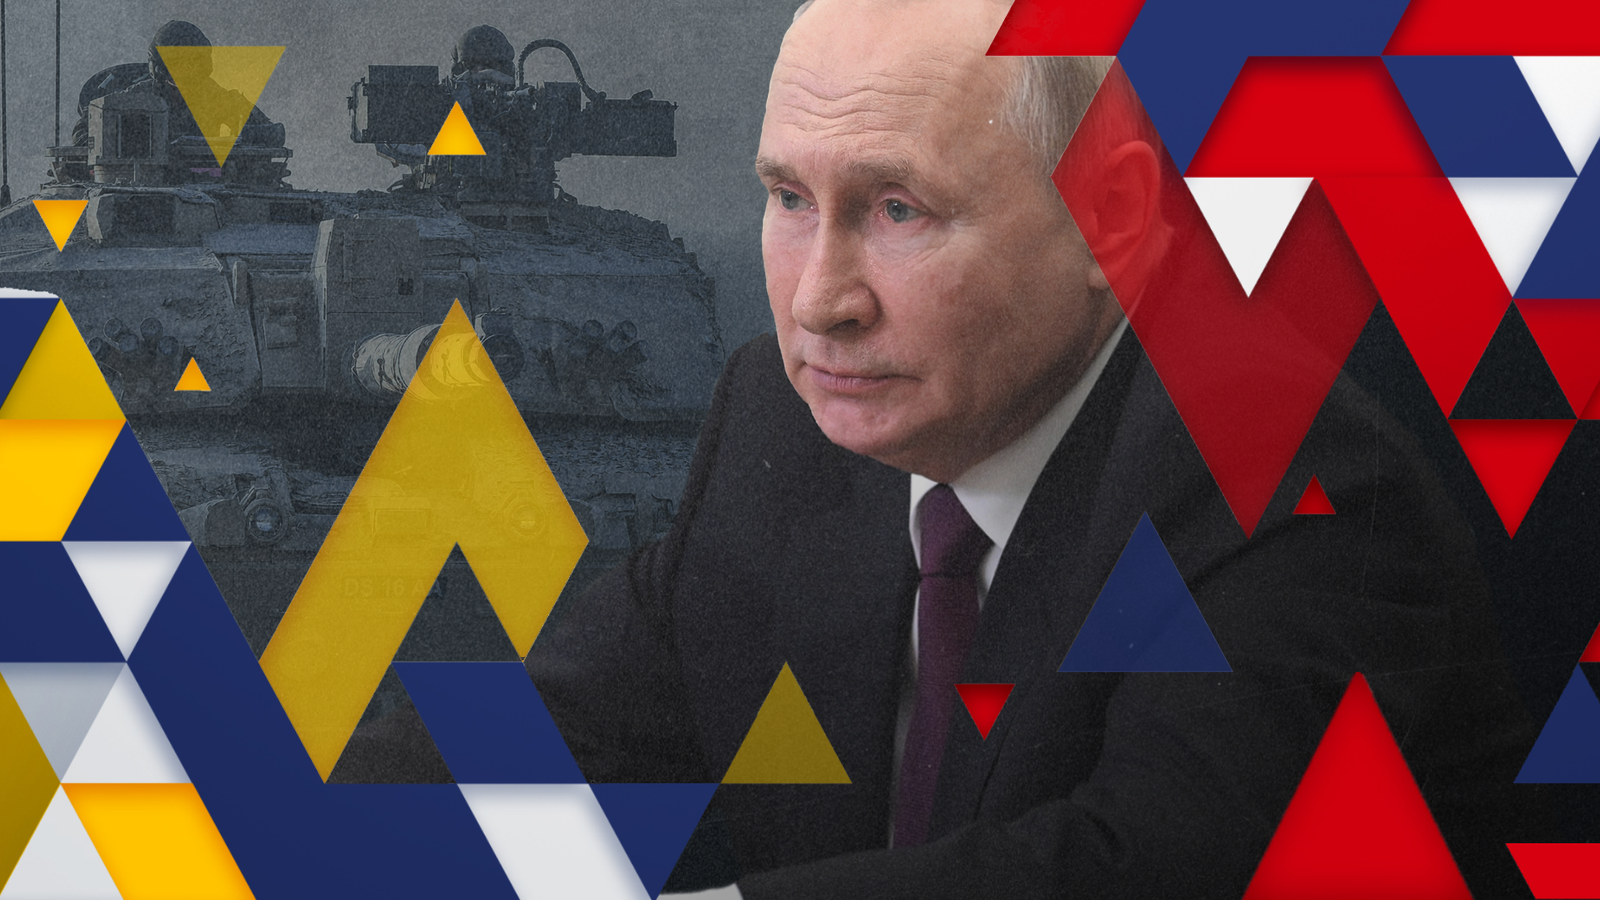 Putin is becoming the problem that Russia needs to solve - but the West must hold its nerve